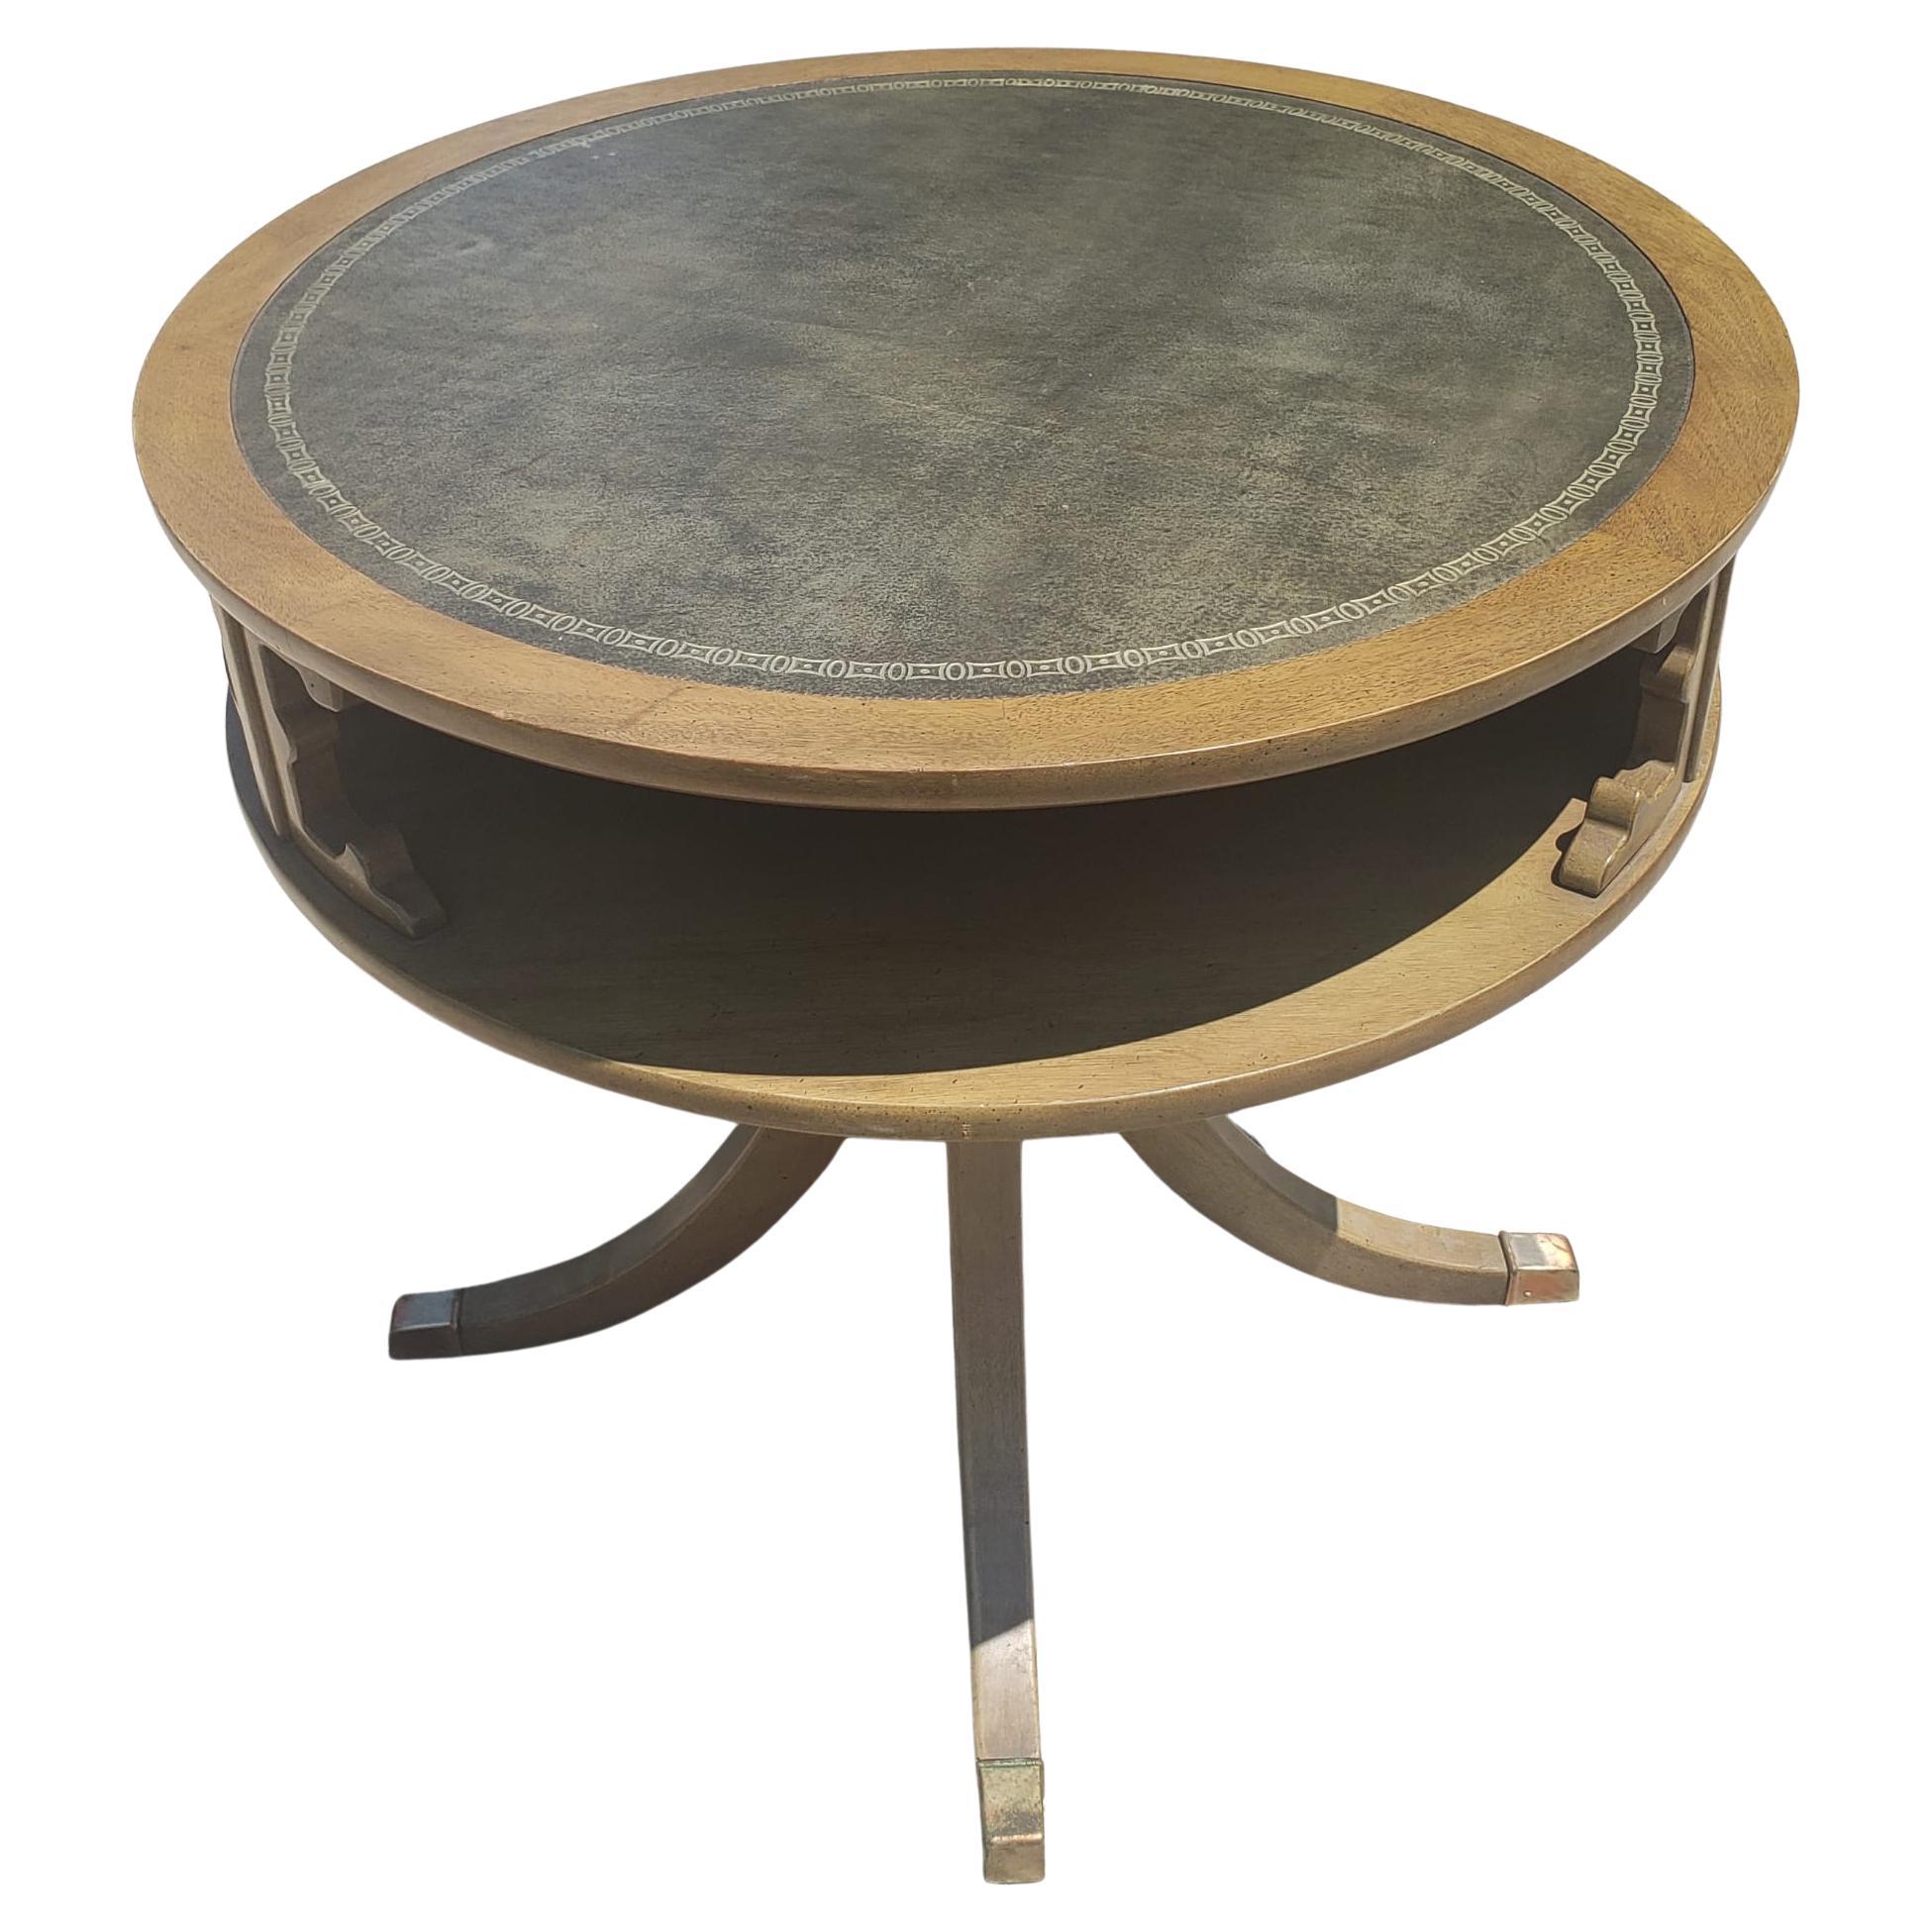 20th Century Mid-Century Two-Tier Quad Pad Pedestal Drum Table with Stenciled Leather Top For Sale